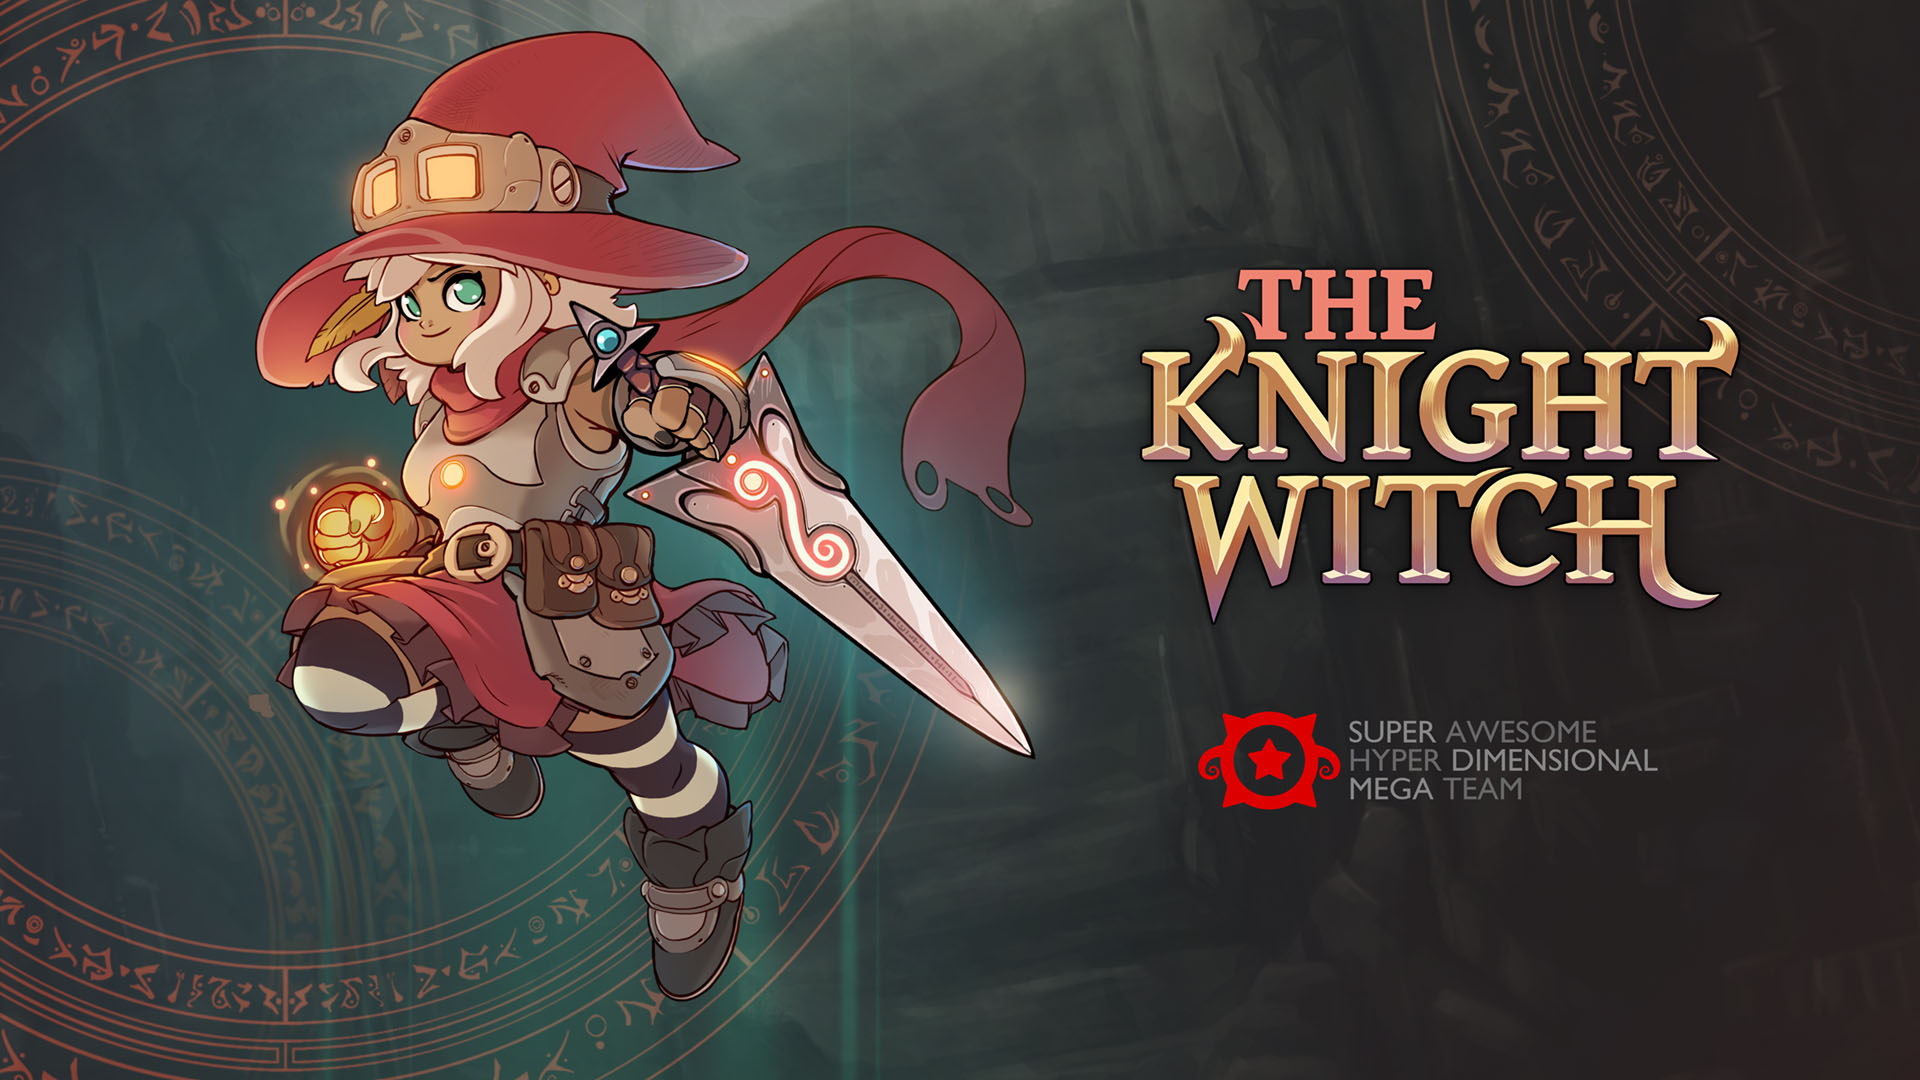 Metroidvania shmup The Knight Witch announced for PC and consoles